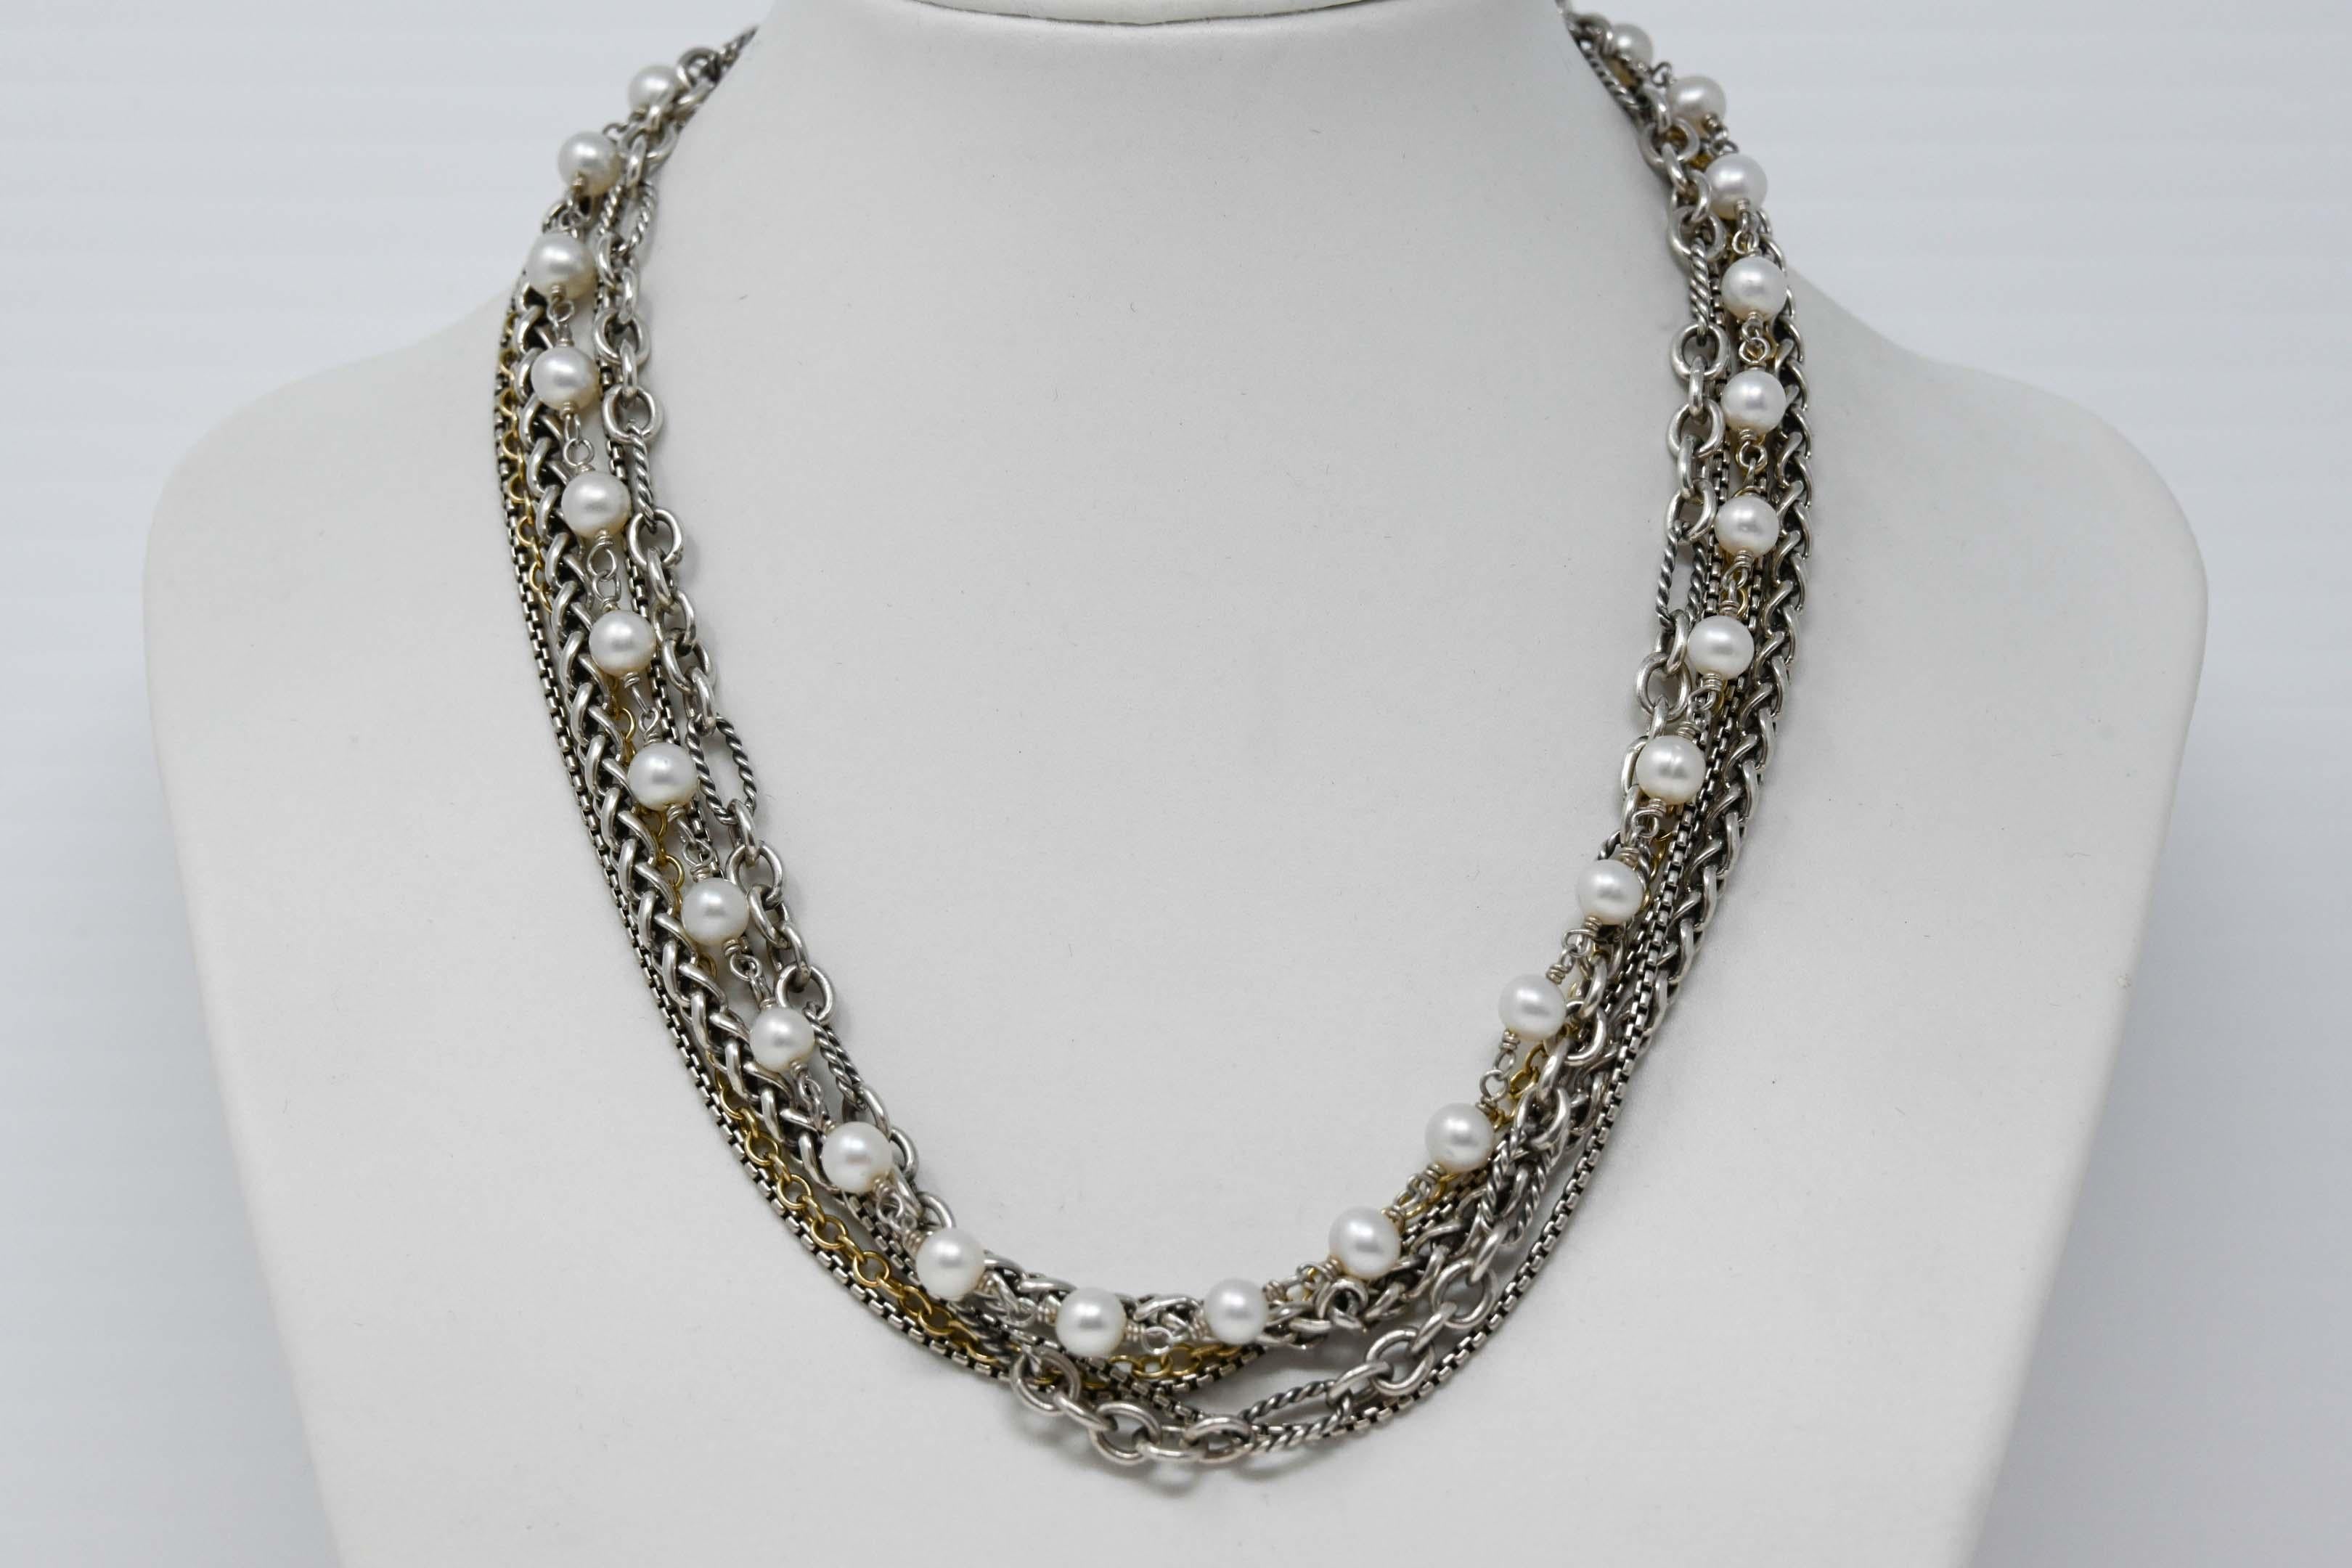 David Yurman sterling silver and 18k gold, pearl 16 inch multi-strand necklace. Stamped on the clasp 925-750 D. Yurman. COA.
